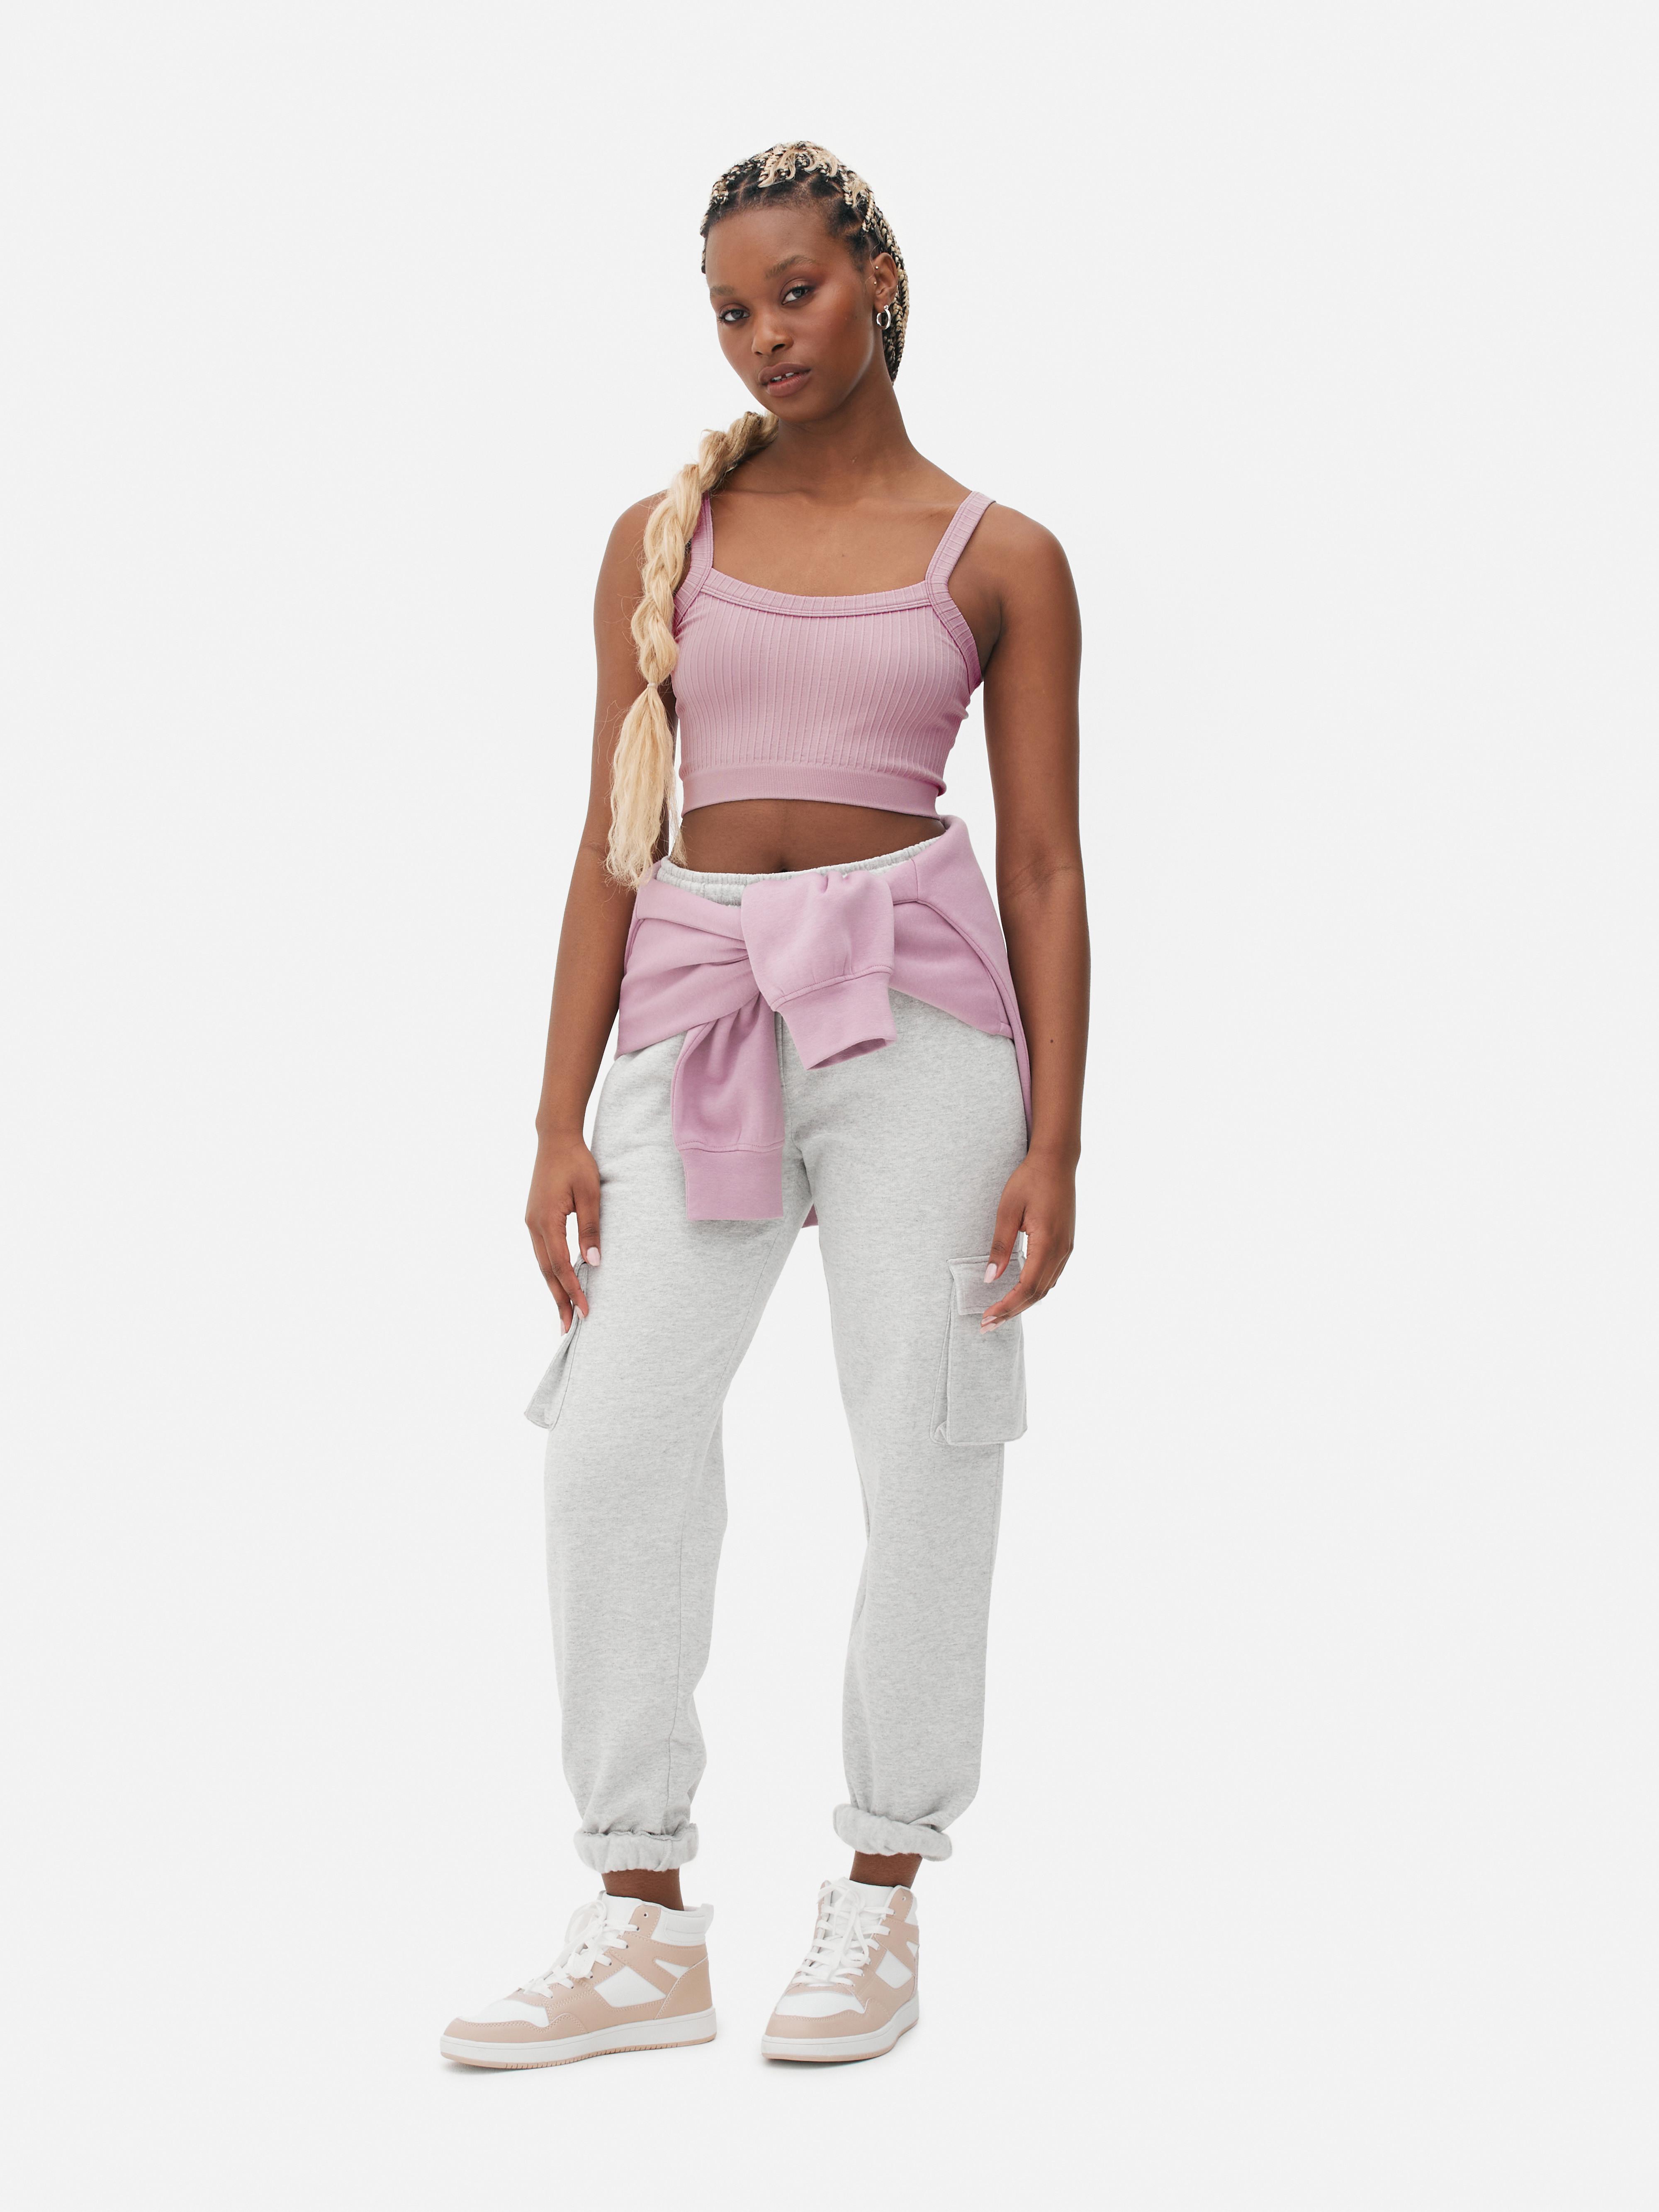 Buy Boohoo Textured Knot Front Bralette Top In Pink